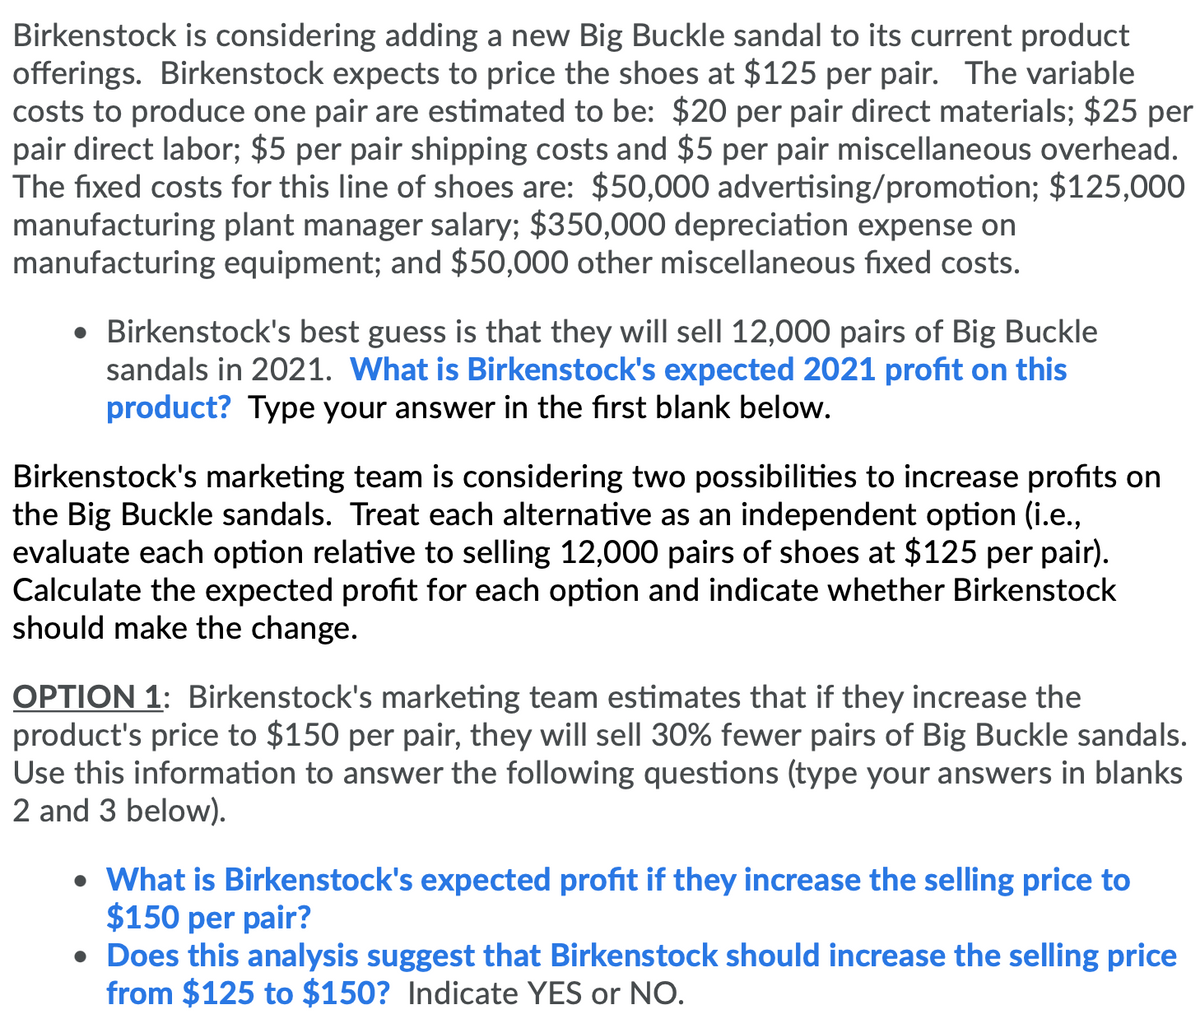 Birkenstock is considering adding a new Big Buckle sandal to its current product
offerings. Birkenstock expects to price the shoes at $125 per pair. The variable
costs to produce one pair are estimated to be: $20 per pair direct materials; $25 per
pair direct labor; $5 per pair shipping costs and $5 per pair miscellaneous overhead.
The fixed costs for this line of shoes are: $50,000 advertising/promotion; $125,000
manufacturing plant manager salary; $350,000 depreciation expense on
manufacturing equipment; and $50,000 other miscellaneous fixed costs.
• Birkenstock's best guess is that they will sell 12,000 pairs of Big Buckle
sandals in 2021. What is Birkenstock's expected 2021 profit on this
product? Type your answer in the first blank below.
Birkenstock's marketing team is considering two possibilities to increase profits on
the Big Buckle sandals. Treat each alternative as an independent option (i.e.,
evaluate each option relative to selling 12,000 pairs of shoes at $125 per pair).
Calculate the expected profit for each option and indicate whether Birkenstock
should make the change.
OPTION 1: Birkenstock's marketing team estimates that if they increase the
product's price to $150 per pair, they will sell 30% fewer pairs of Big Buckle sandals.
Use this information to answer the following questions (type your answers in blanks
2 and 3 below).
• What is Birkenstock's expected profit if they increase the selling price to
$150 per pair?
• Does this analysis suggest that Birkenstock should increase the selling price
from $125 to $150? Indicate YES or NO.
